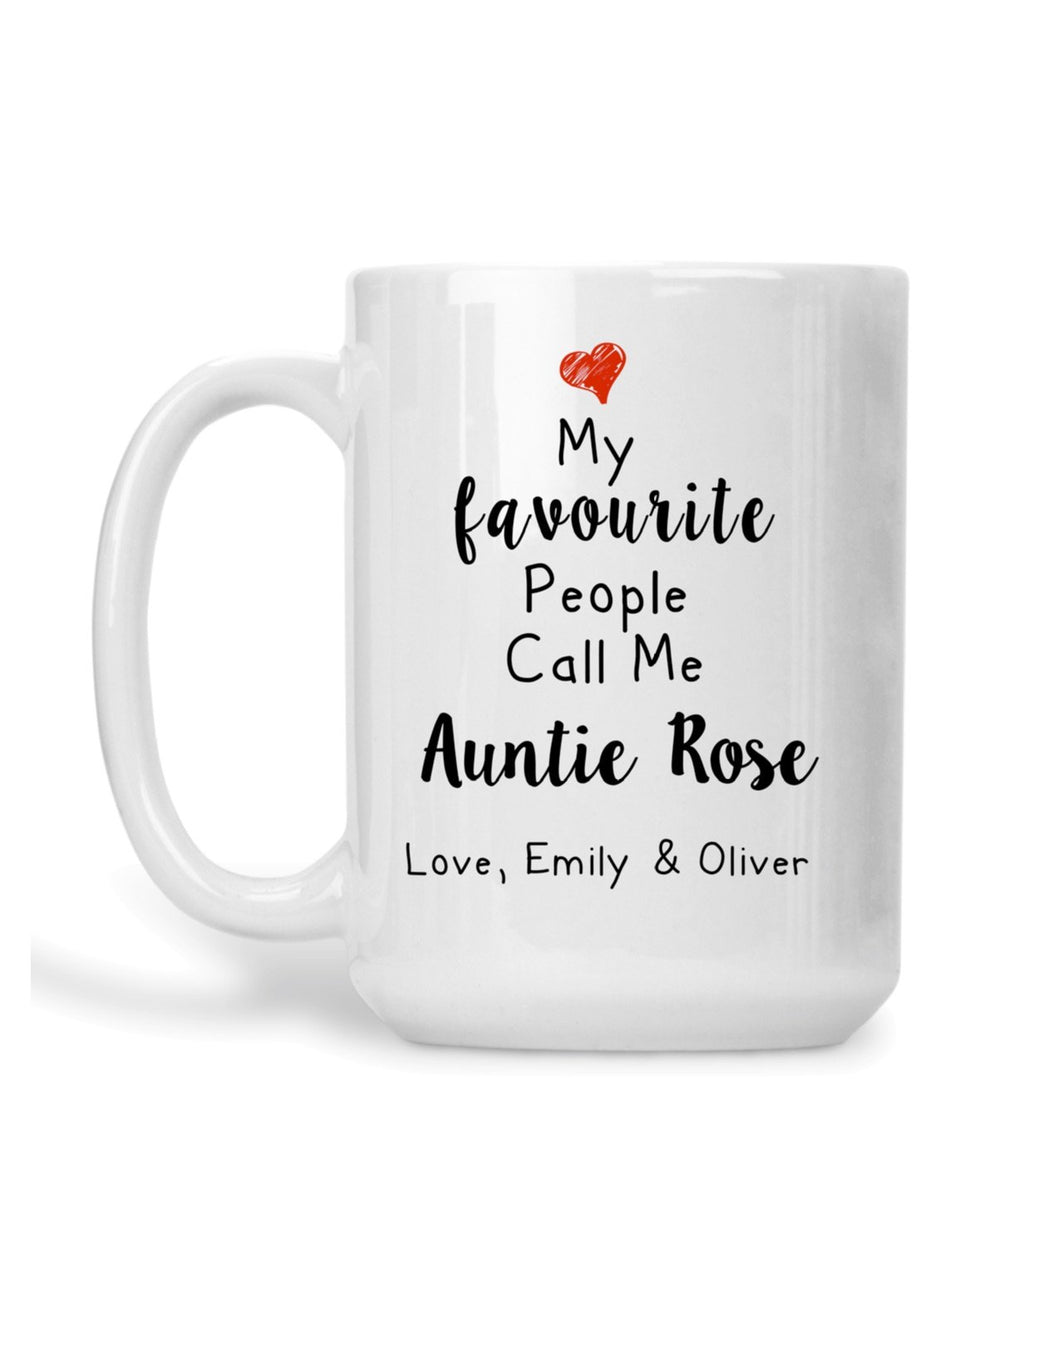 My favourite people call me Auntie